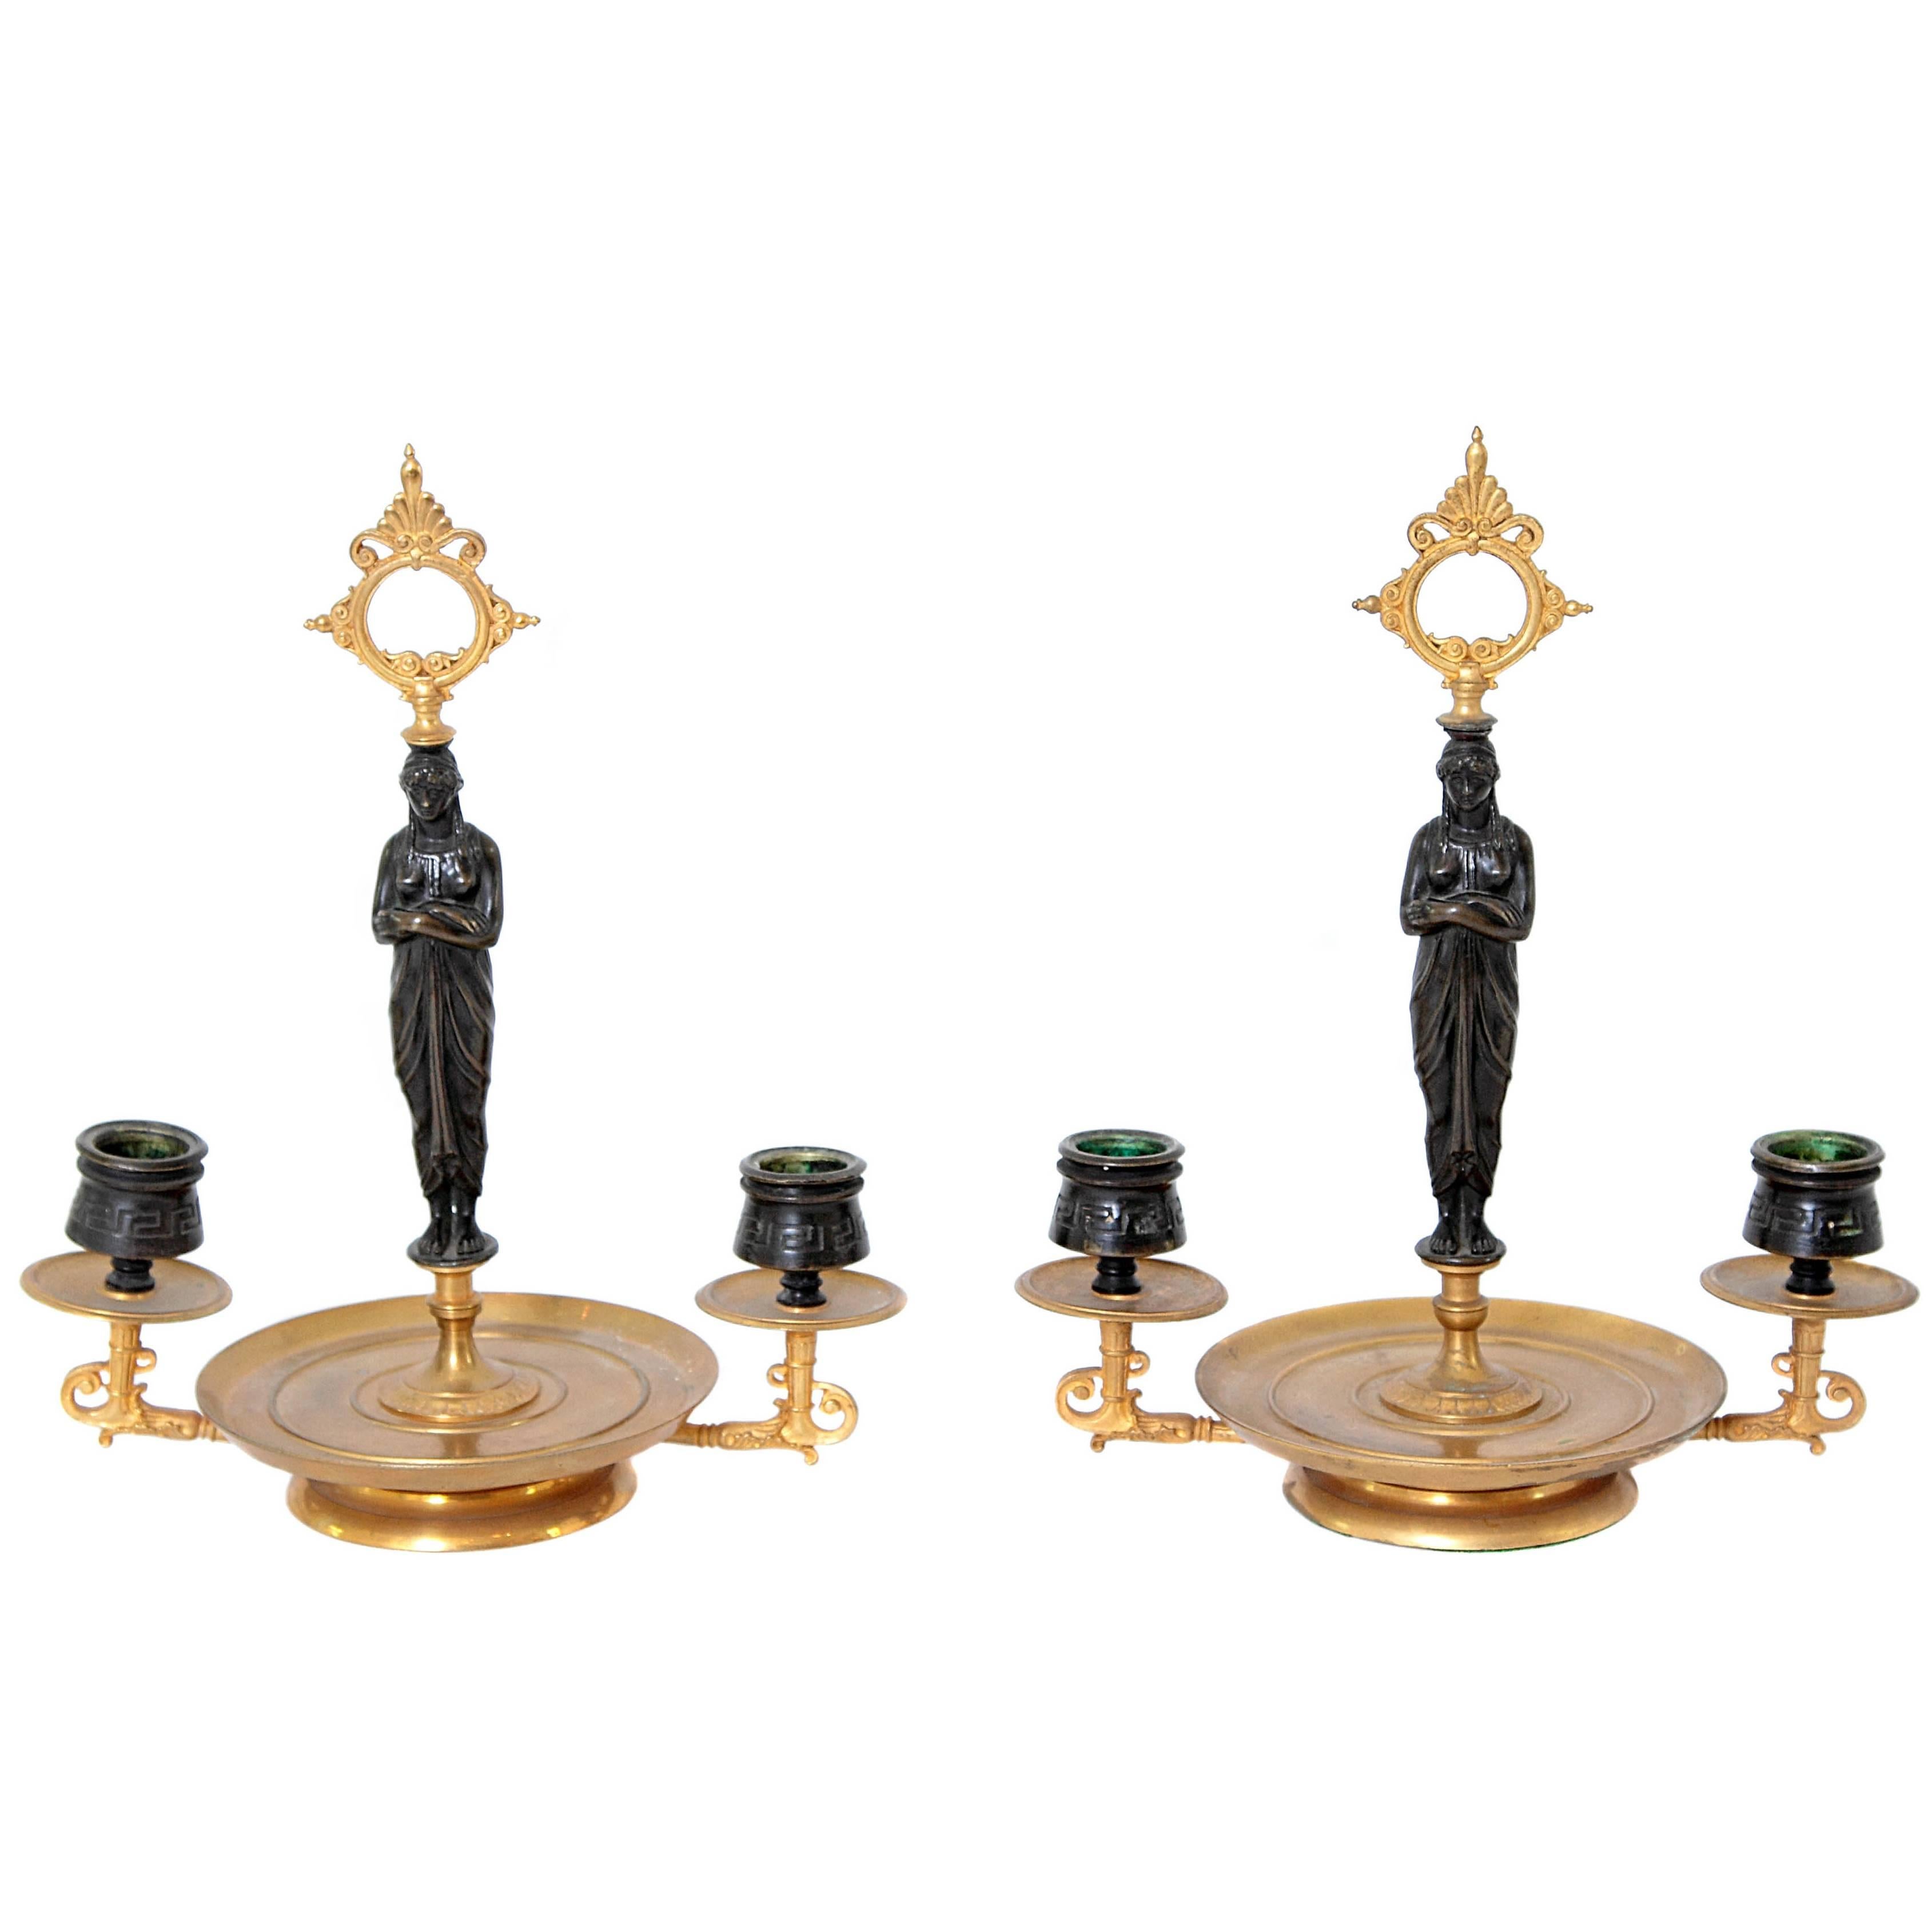 Pair of Patinated and Gilt Bronze Figural Candelabra